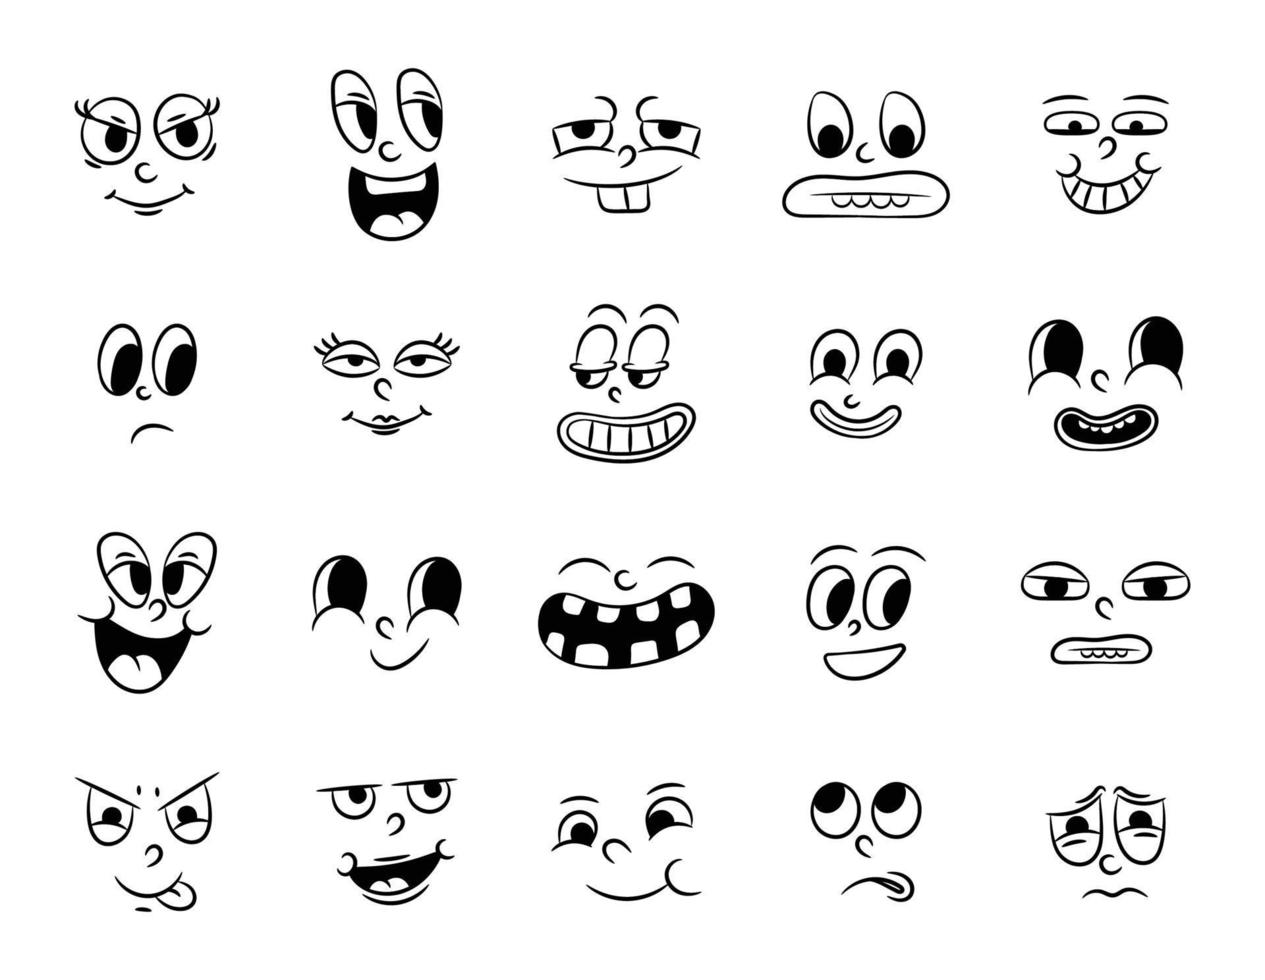 Collection of old retro traditional cartoon animation. Vintage faces of people with different emotions of the 20s 30s. Emoji character expressions 50s 60s. Head faces design elements in comic style vector